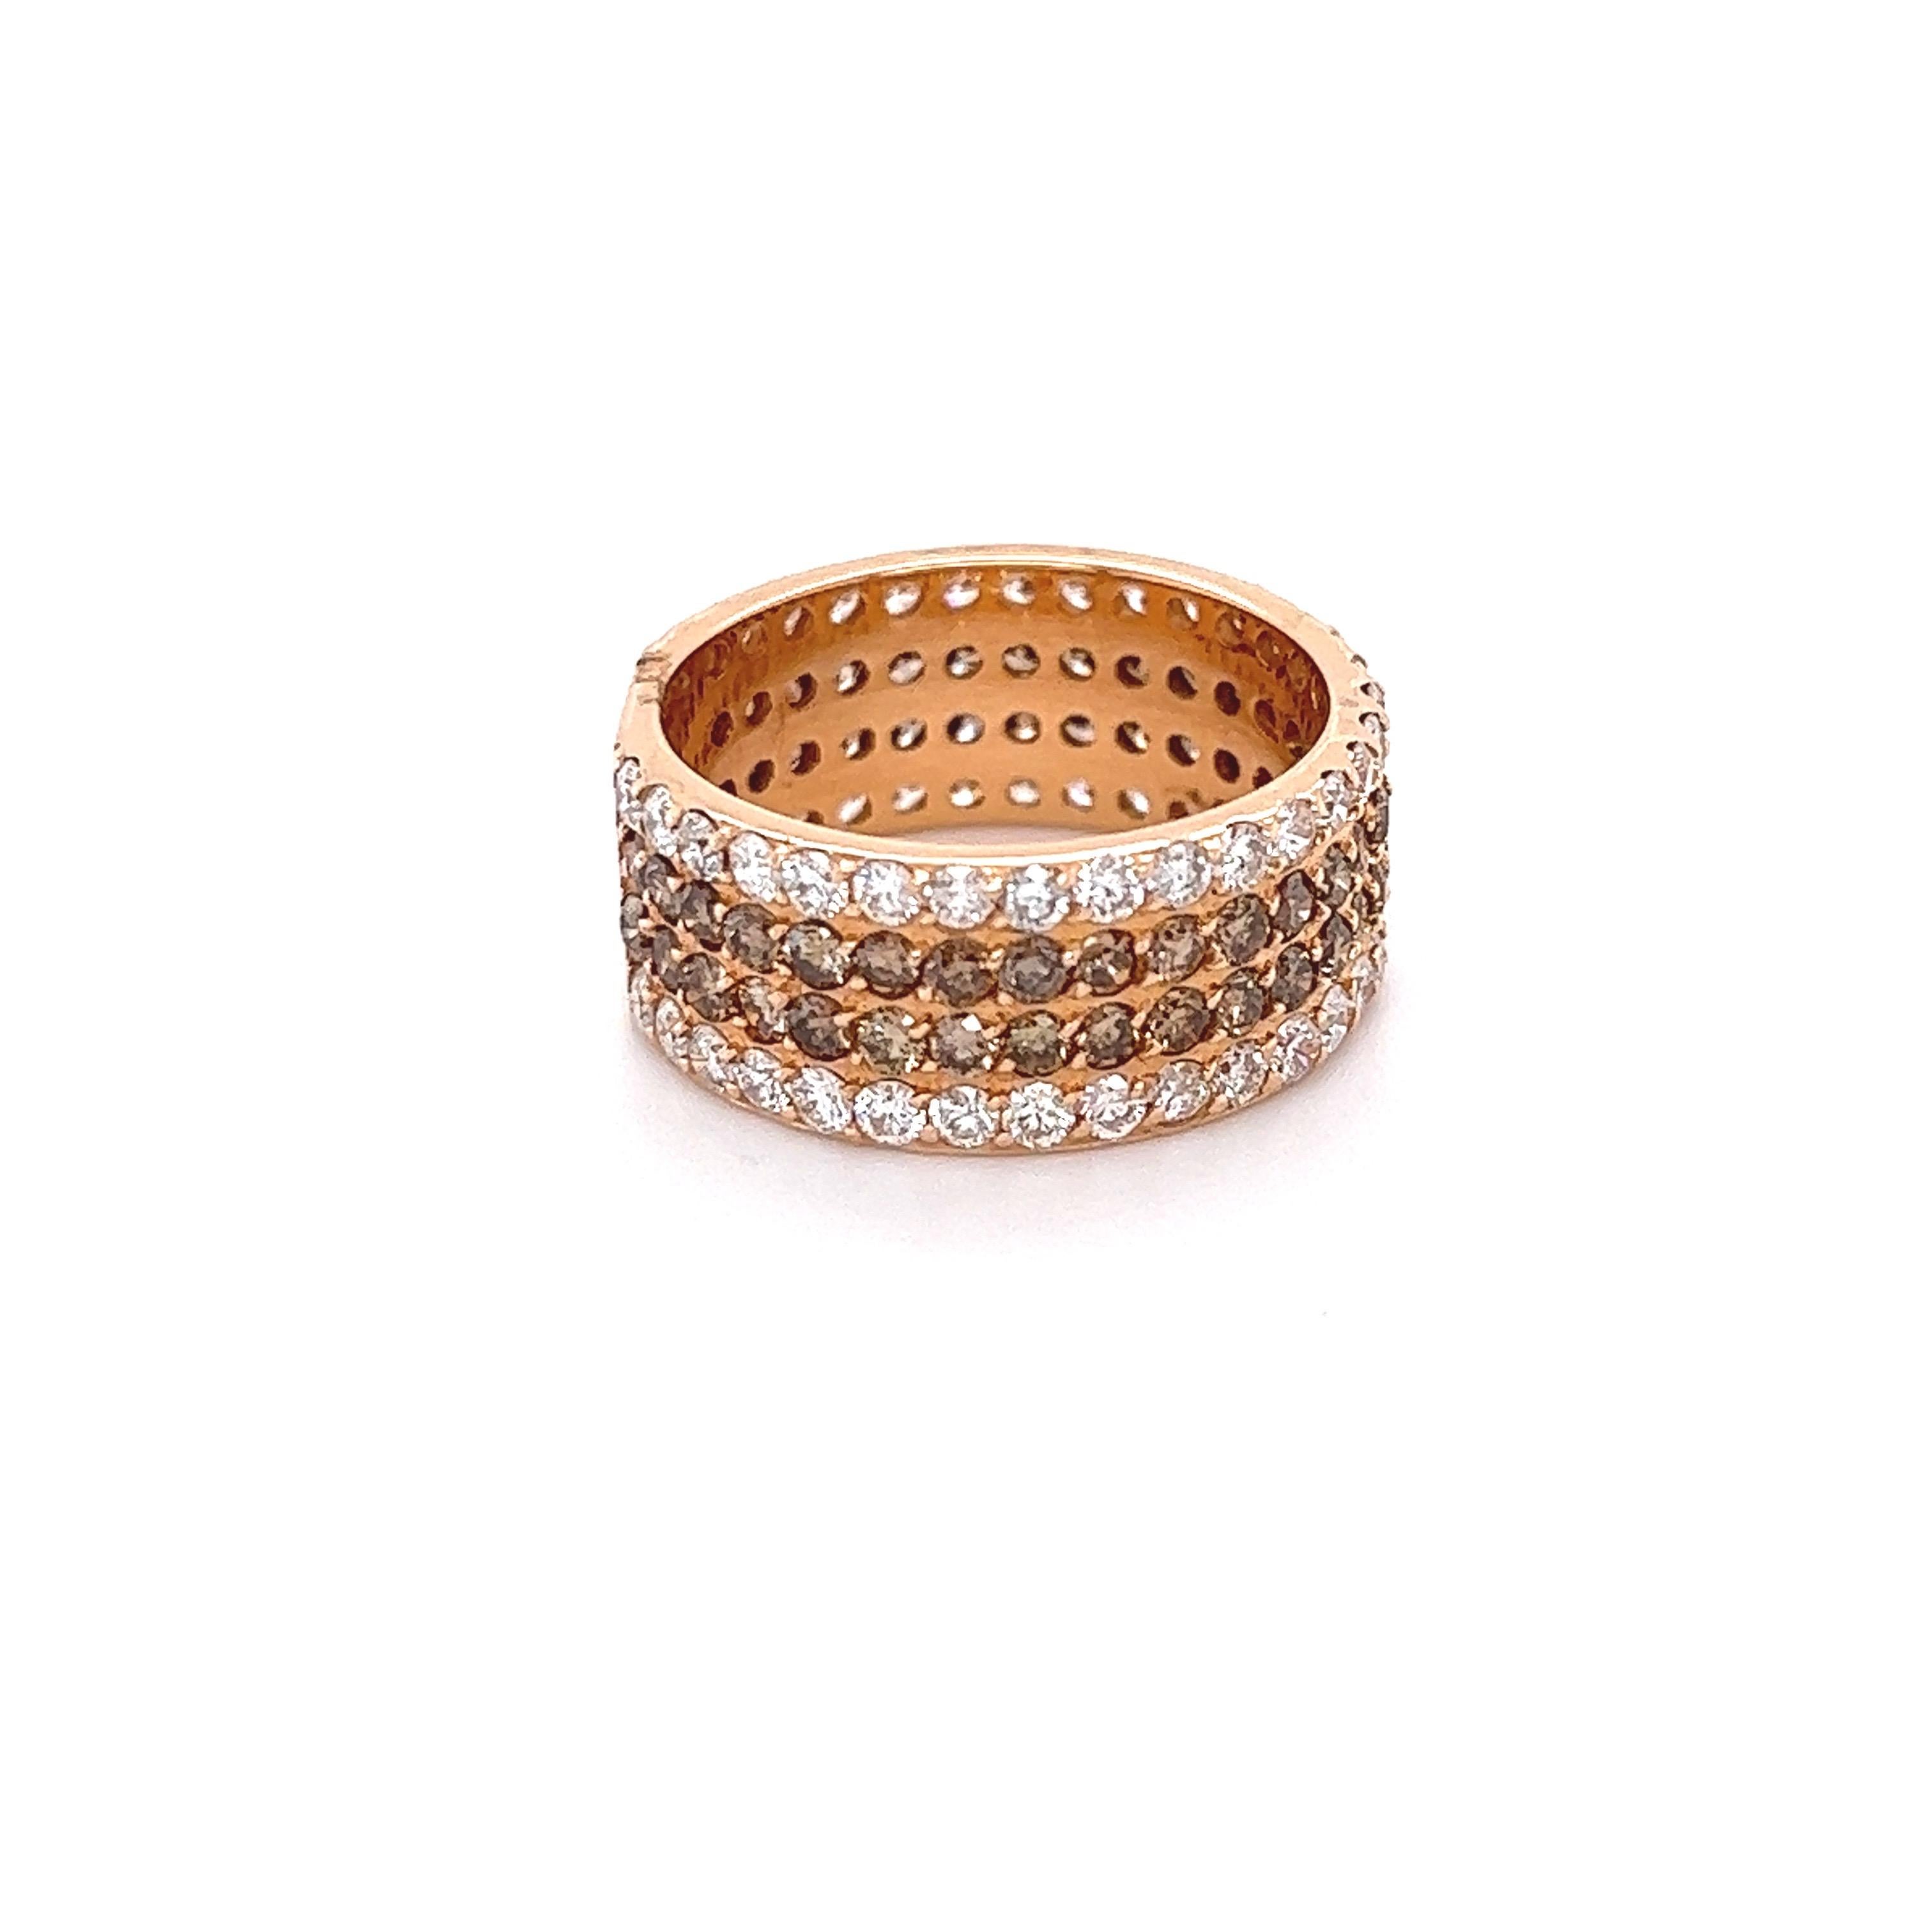 This Natural Brown Diamond and White Diamond Band is stunning and versatile! Can be worn as a wedding or engagment band or as a gorgeous cocktail ring or an everyday stunner! 

There are 60 Natural Round Cut Champagne/Brown Diamonds that weigh 1.68